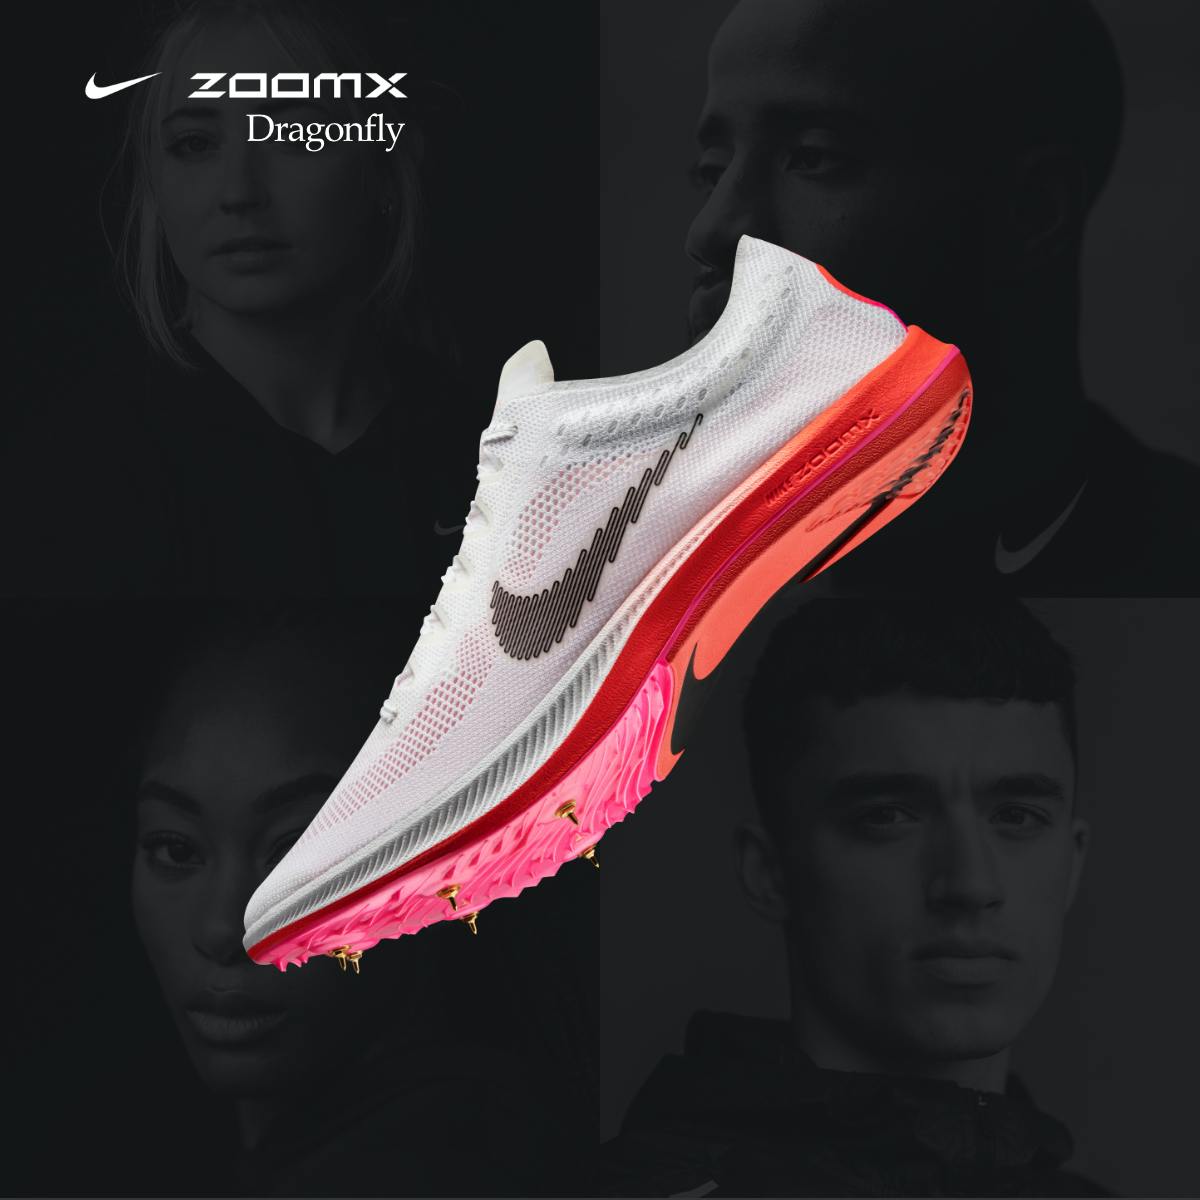 nike-zoomx-dragonfly-running-spikes